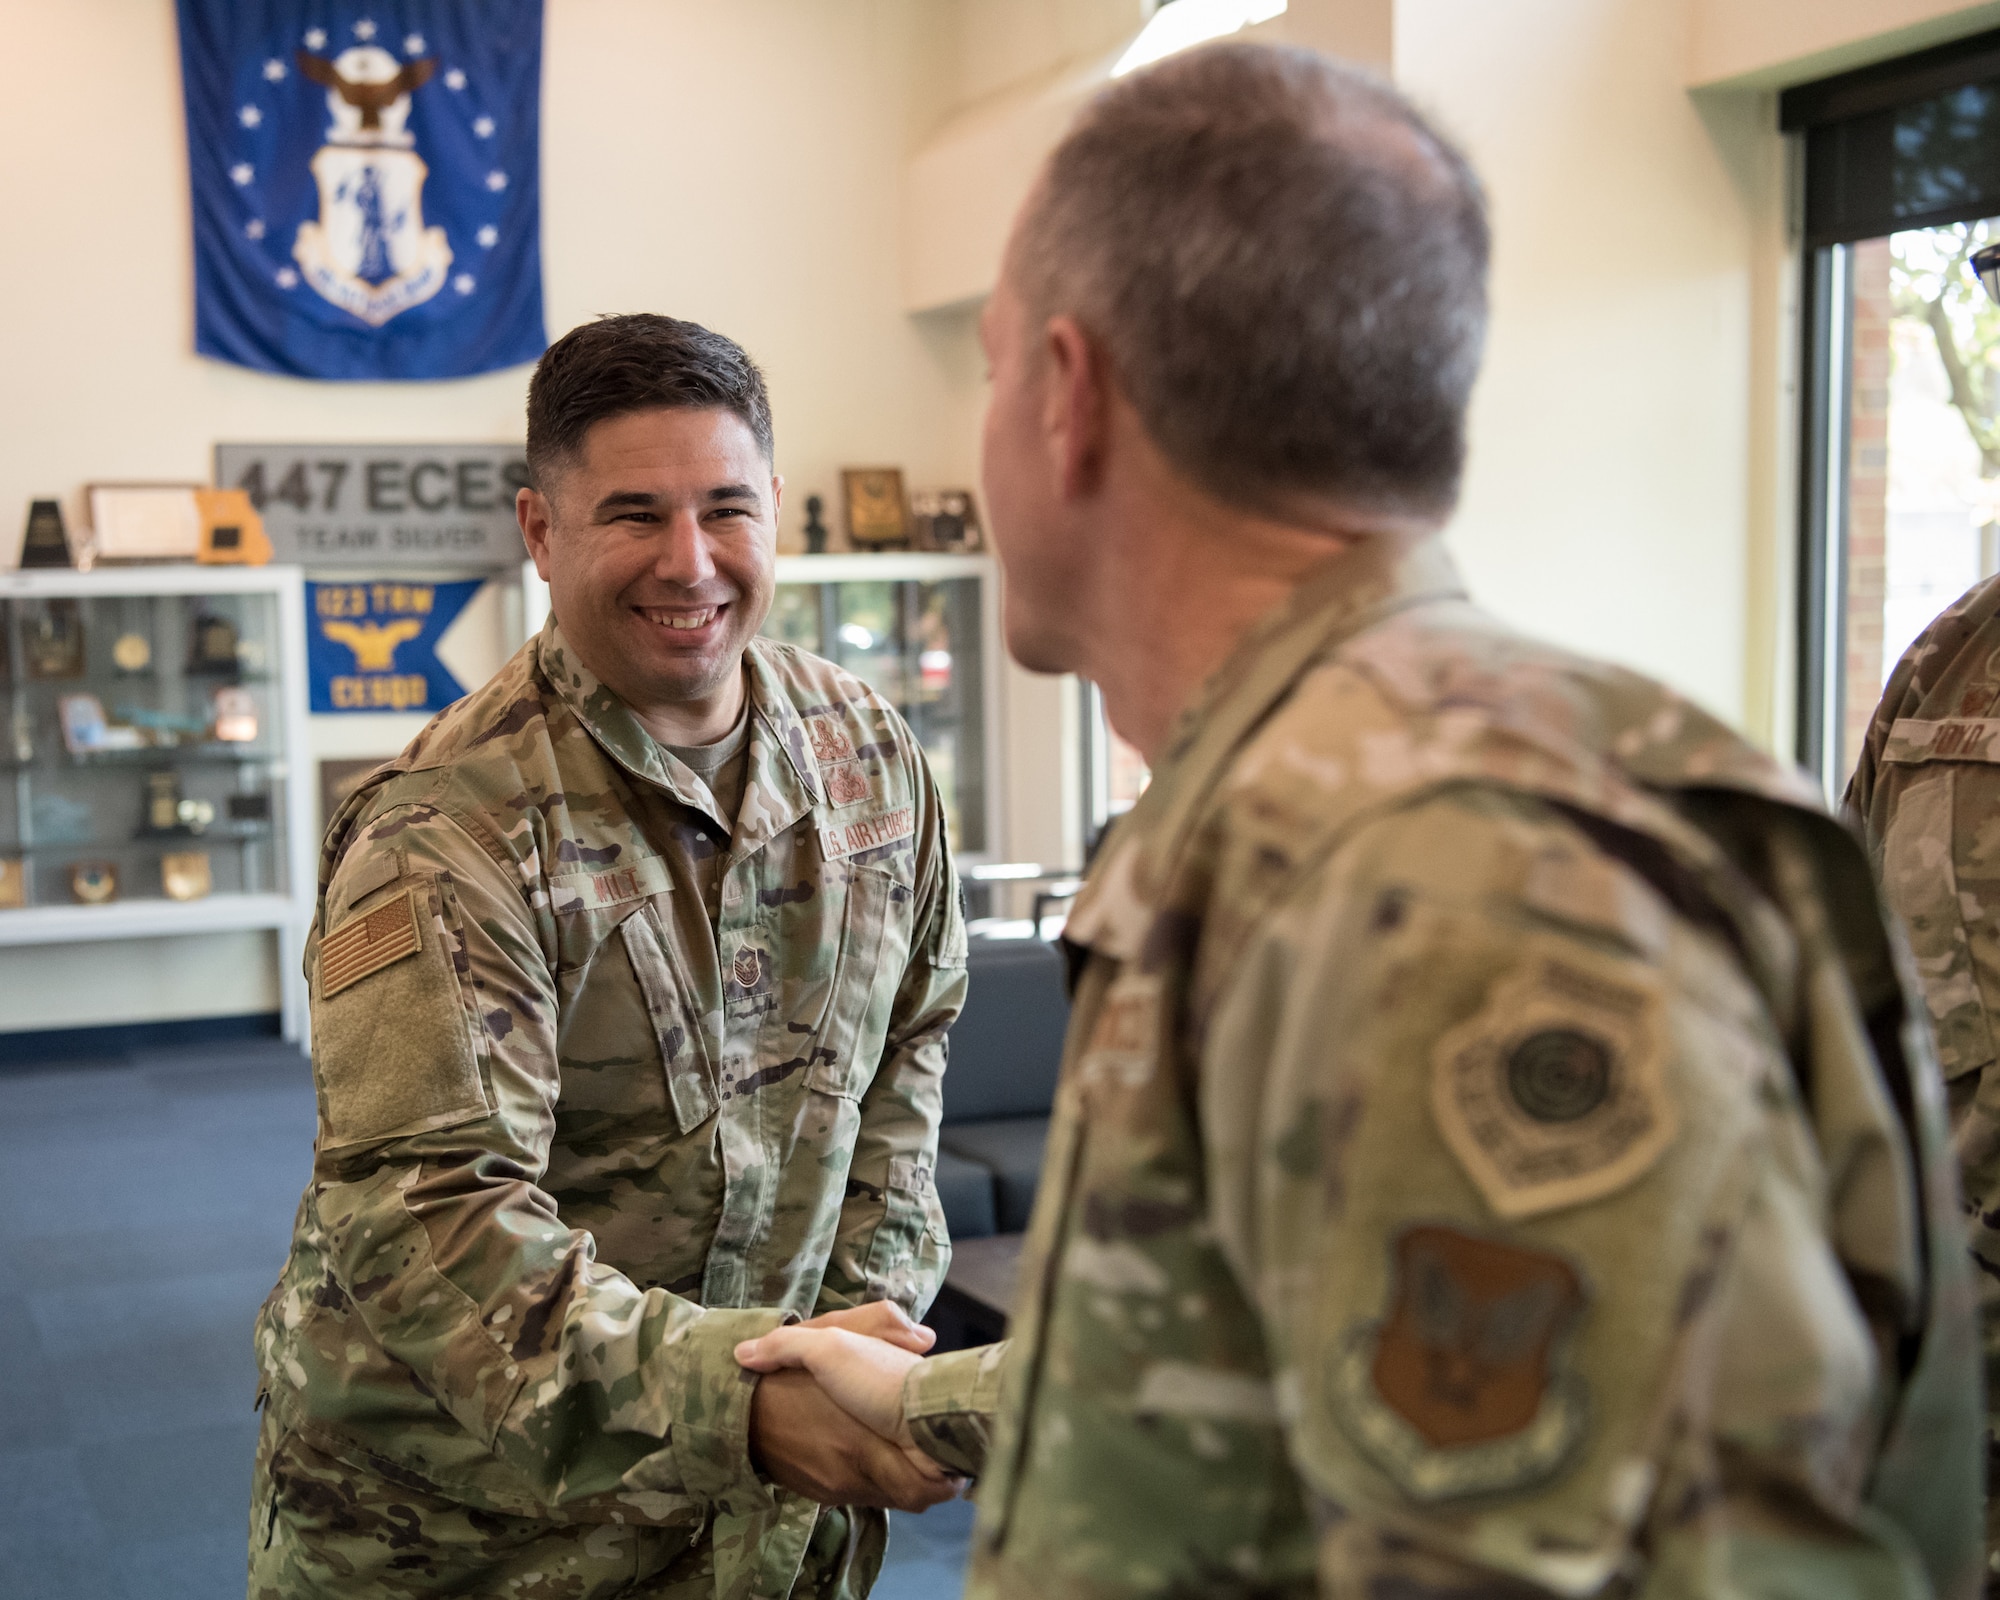 Air Force Chief of Staff Gen. David L. Goldfein greets Master Sgt. Matthew Wilt, a 123rd Explosive Ordnance Disposal Flight Airman, during a tour of the Kentucky Air National Guard Base in Louisville, Ky., Aug. 10, 2019. In addition to C-130 airlift and EOD, the base is home to a special tactics squadron and the only contingency response group in the Air National Guard. (U.S. Air National Guard photo by Staff Sgt. Joshua Horton)